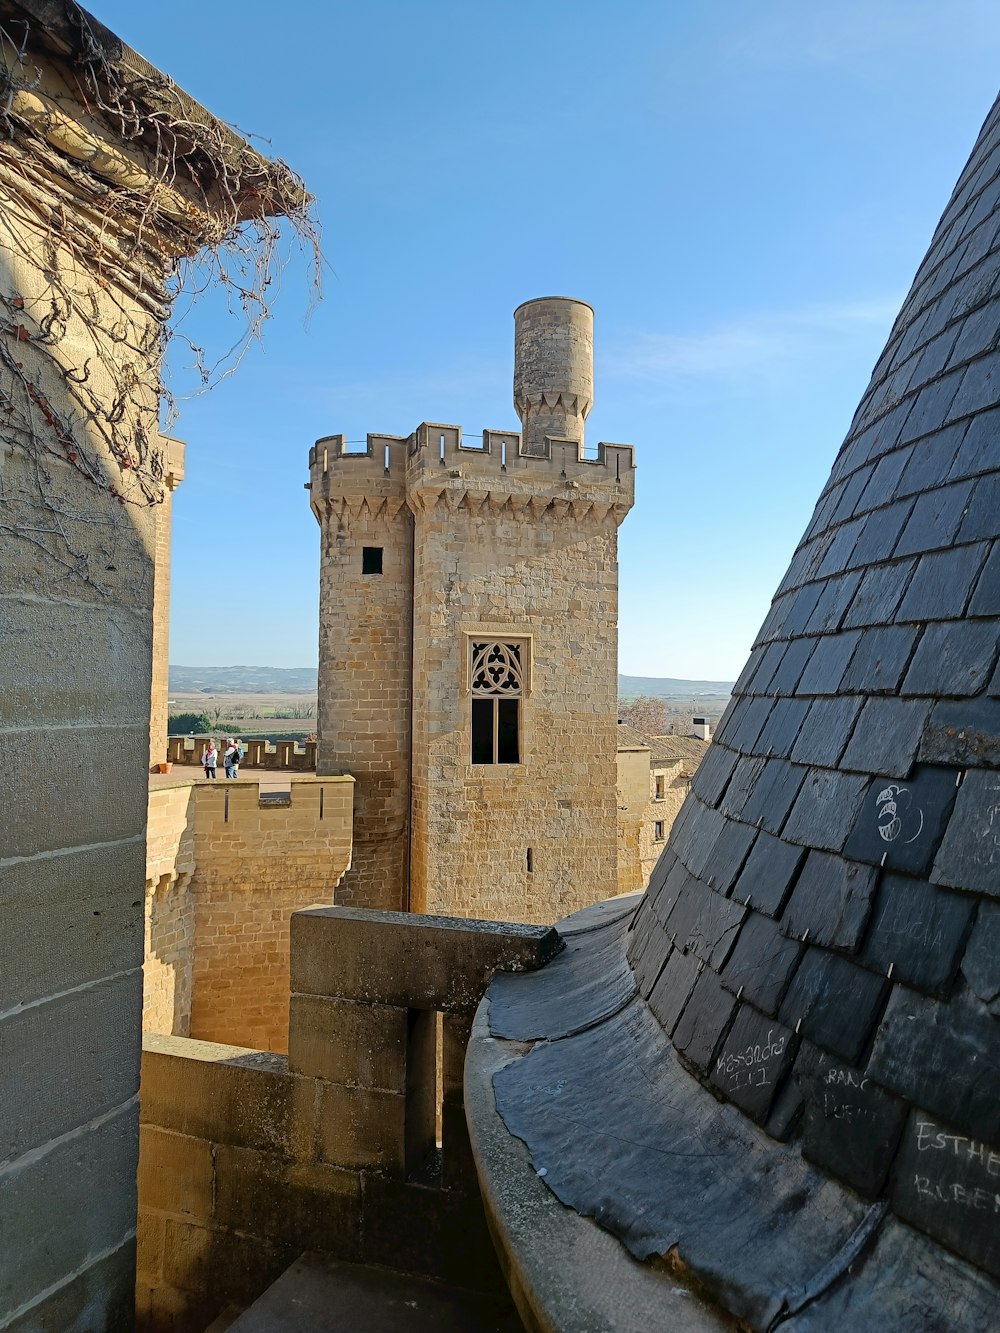 a view of a castle from a rooftop